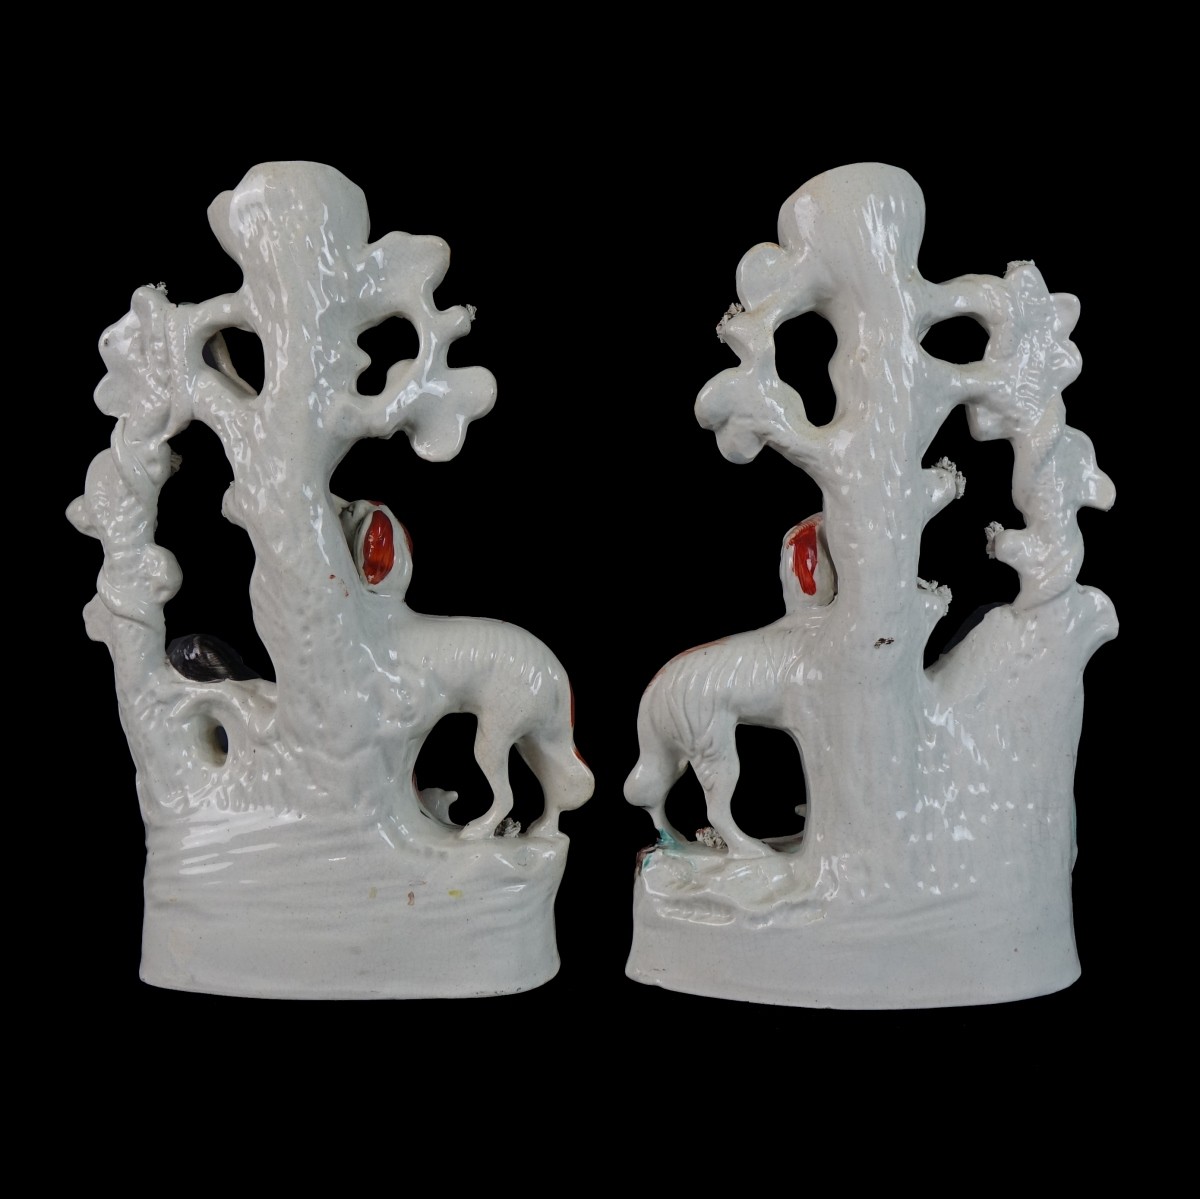 Pair of Staffordshire Group